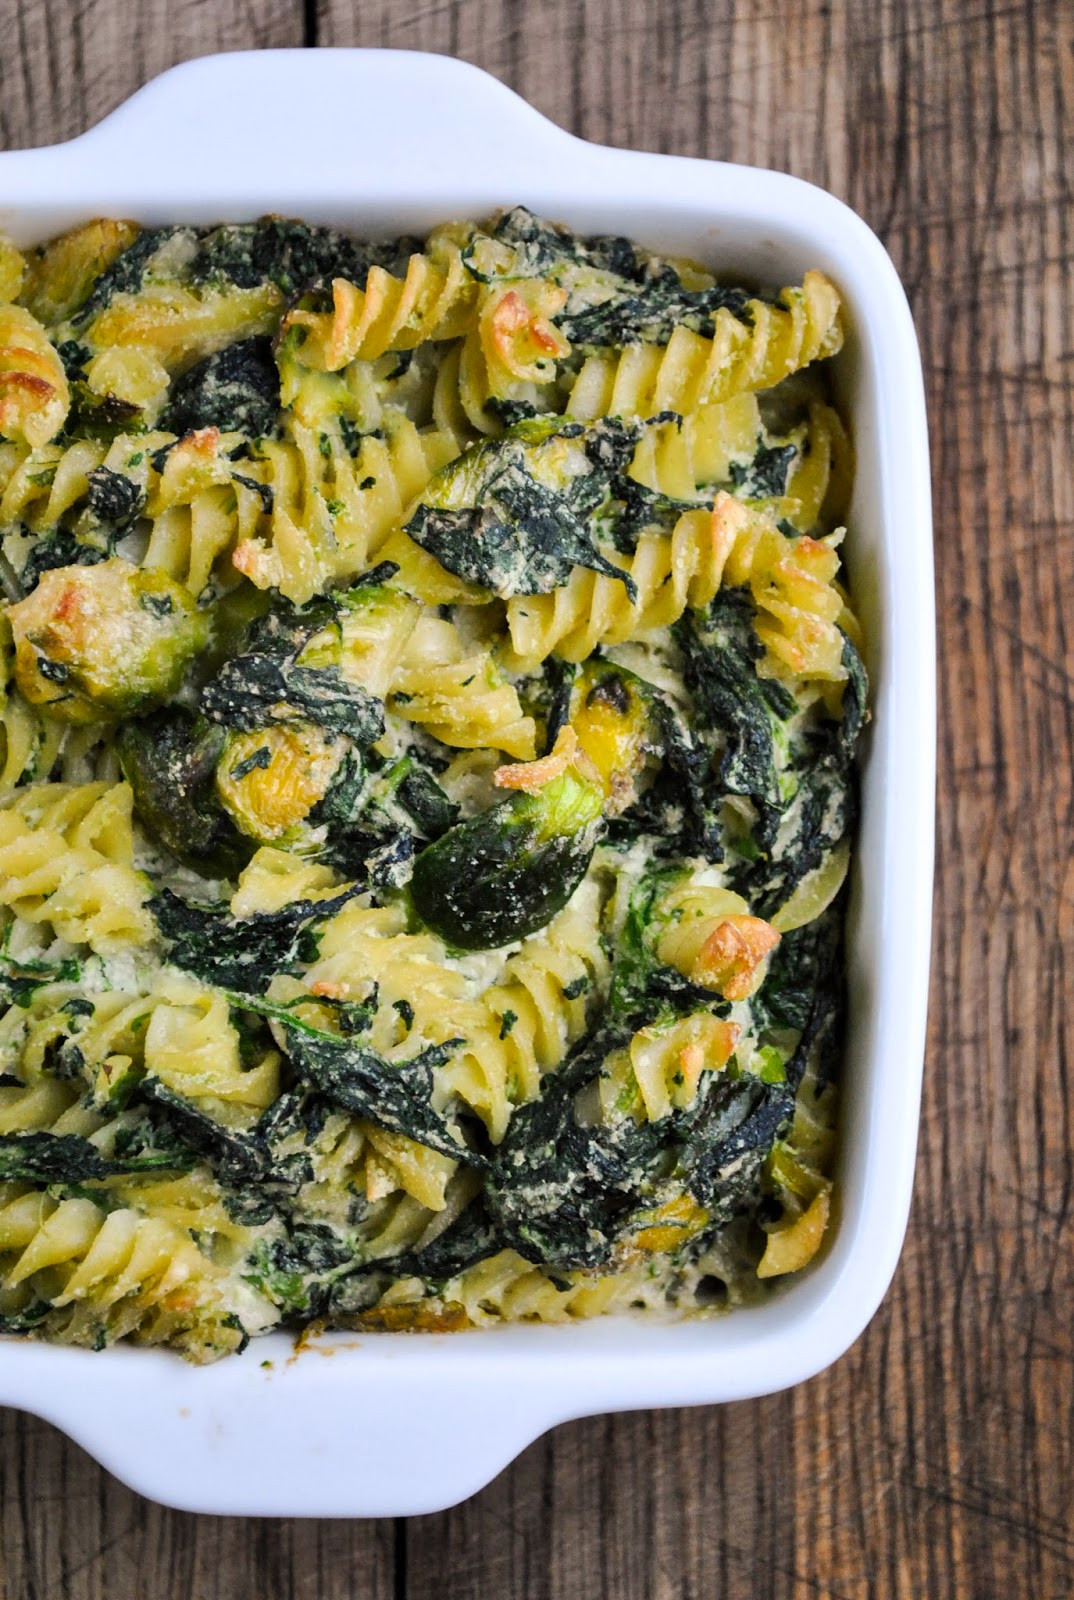 Baking Vegetarian Recipes
 Baked pasta with creamy spinach and Brussels sprouts